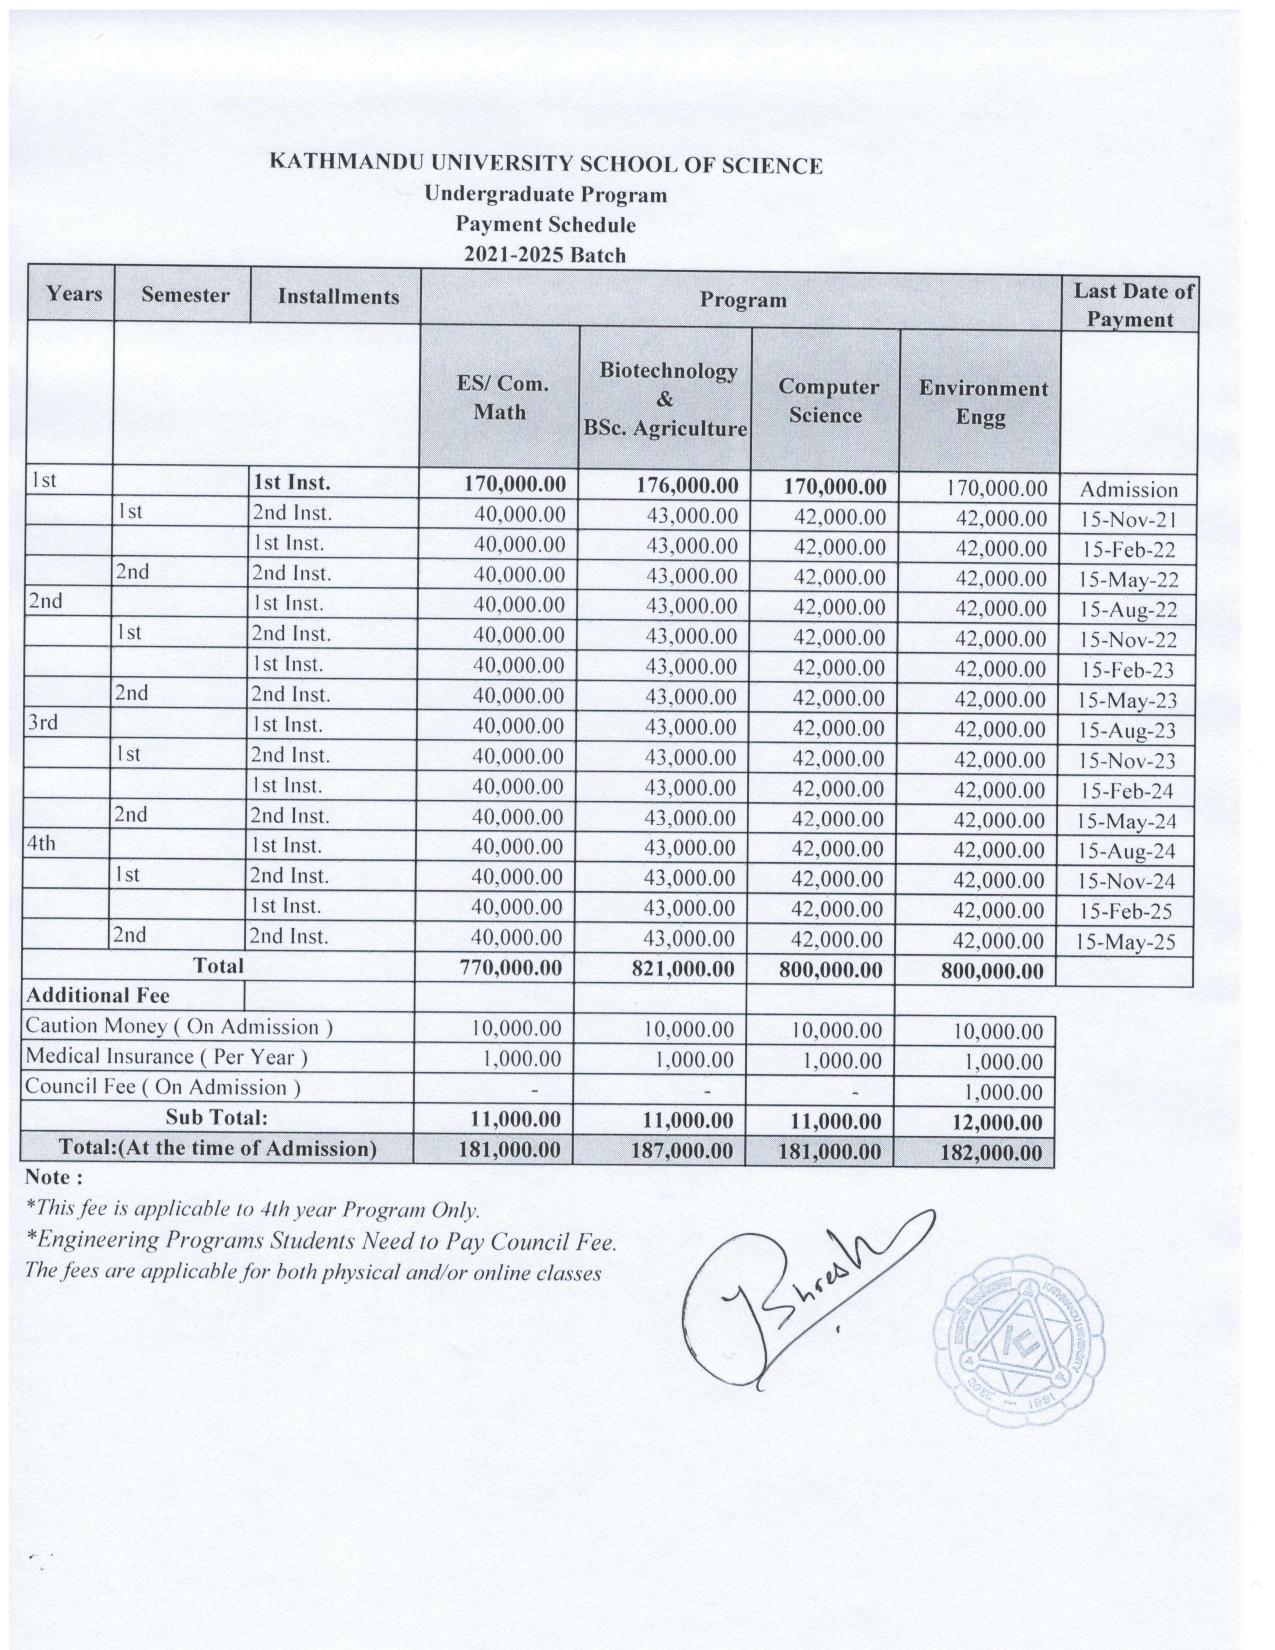 SOS-2021 batch fee structure